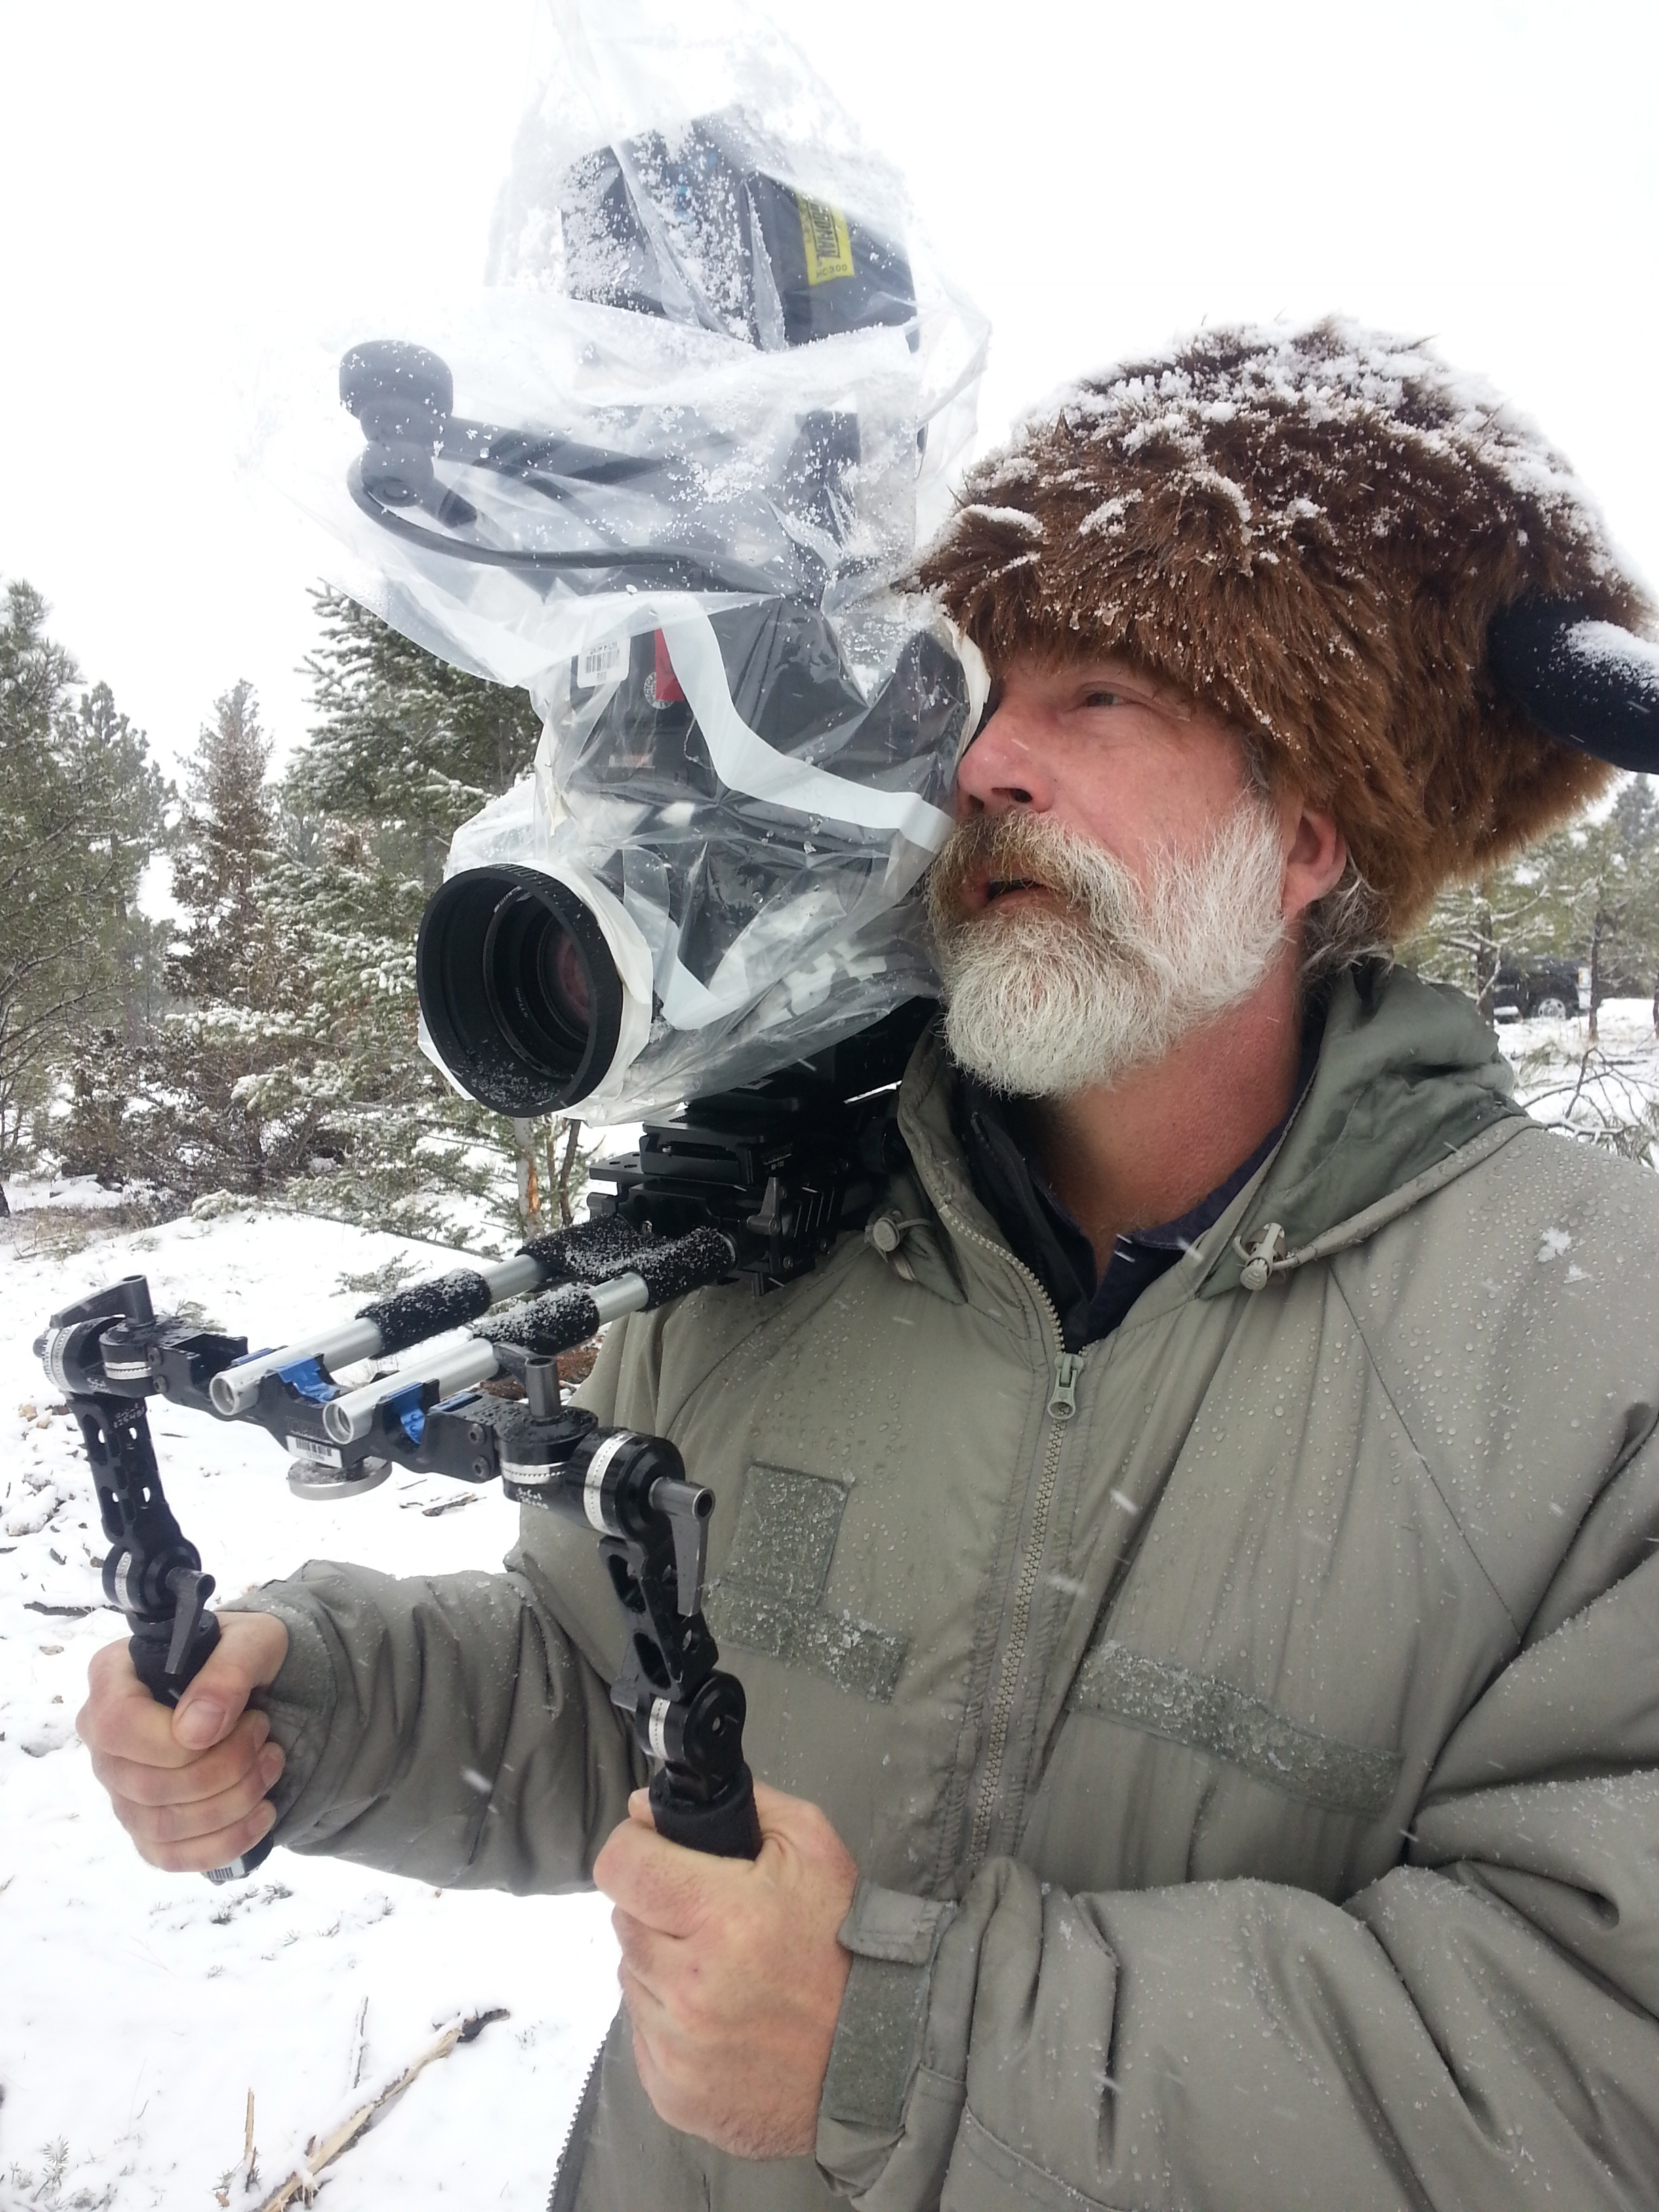 Pretending to know how to use a camera in South Dakota on a Nat Geo shoot.